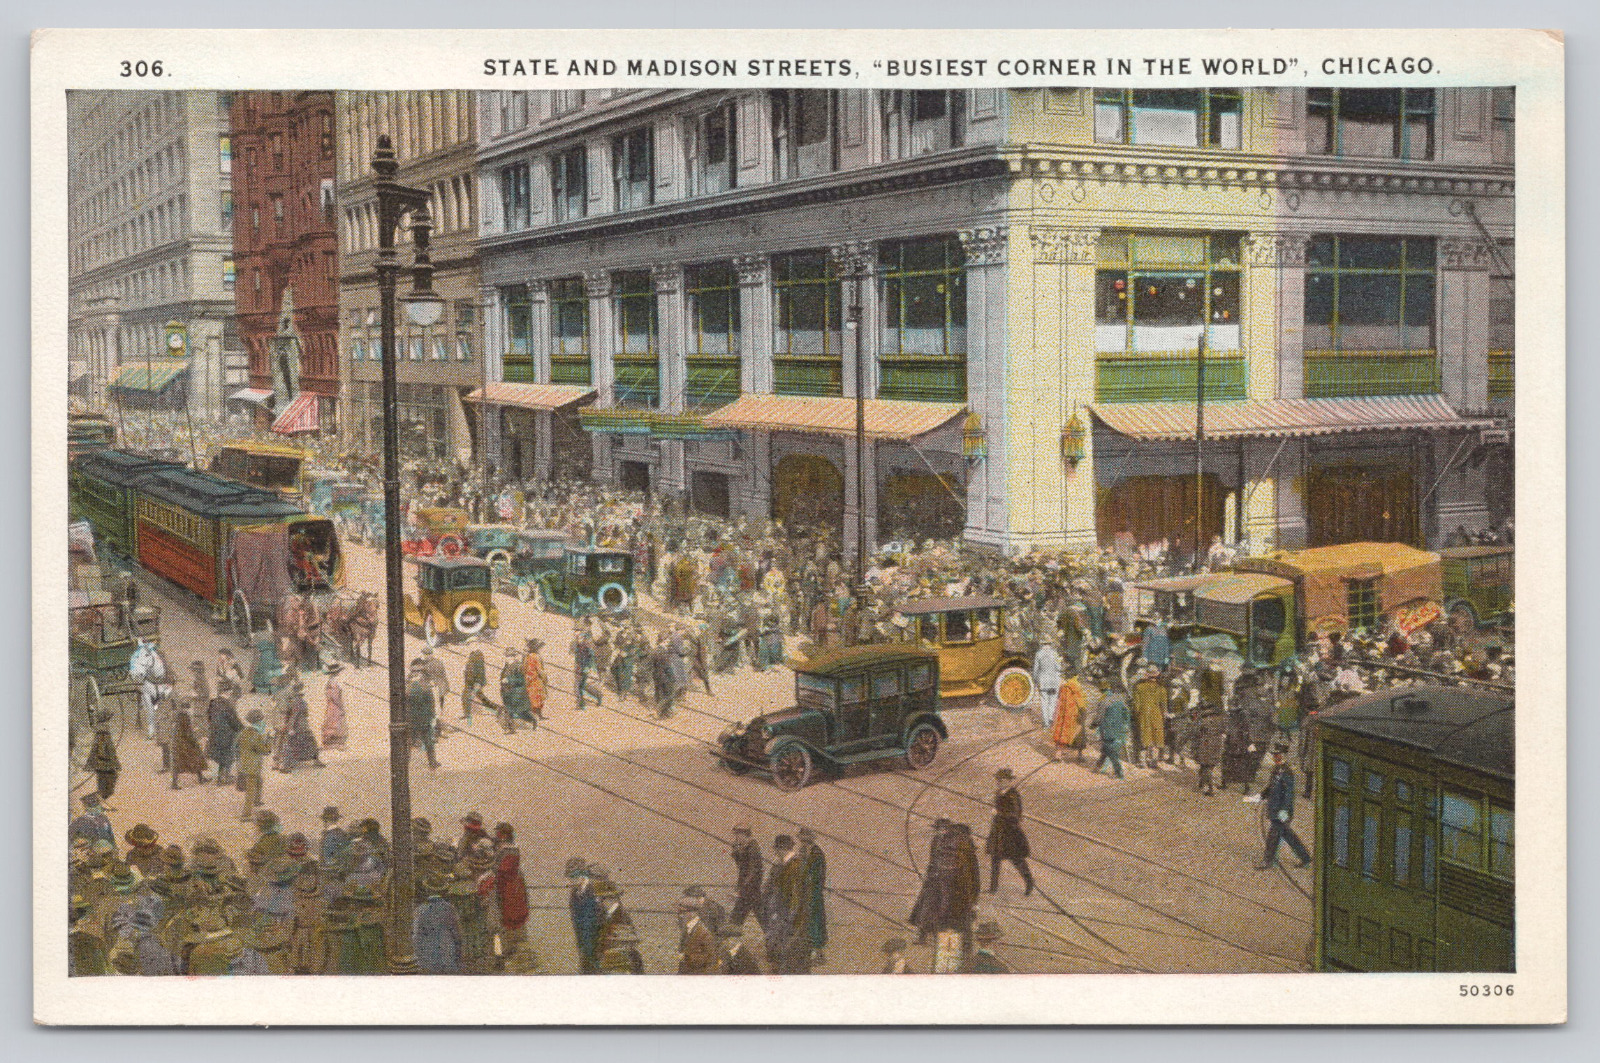 State & Madison Streets Busiest Corner, Chicago IL Loop Retail District Postcard